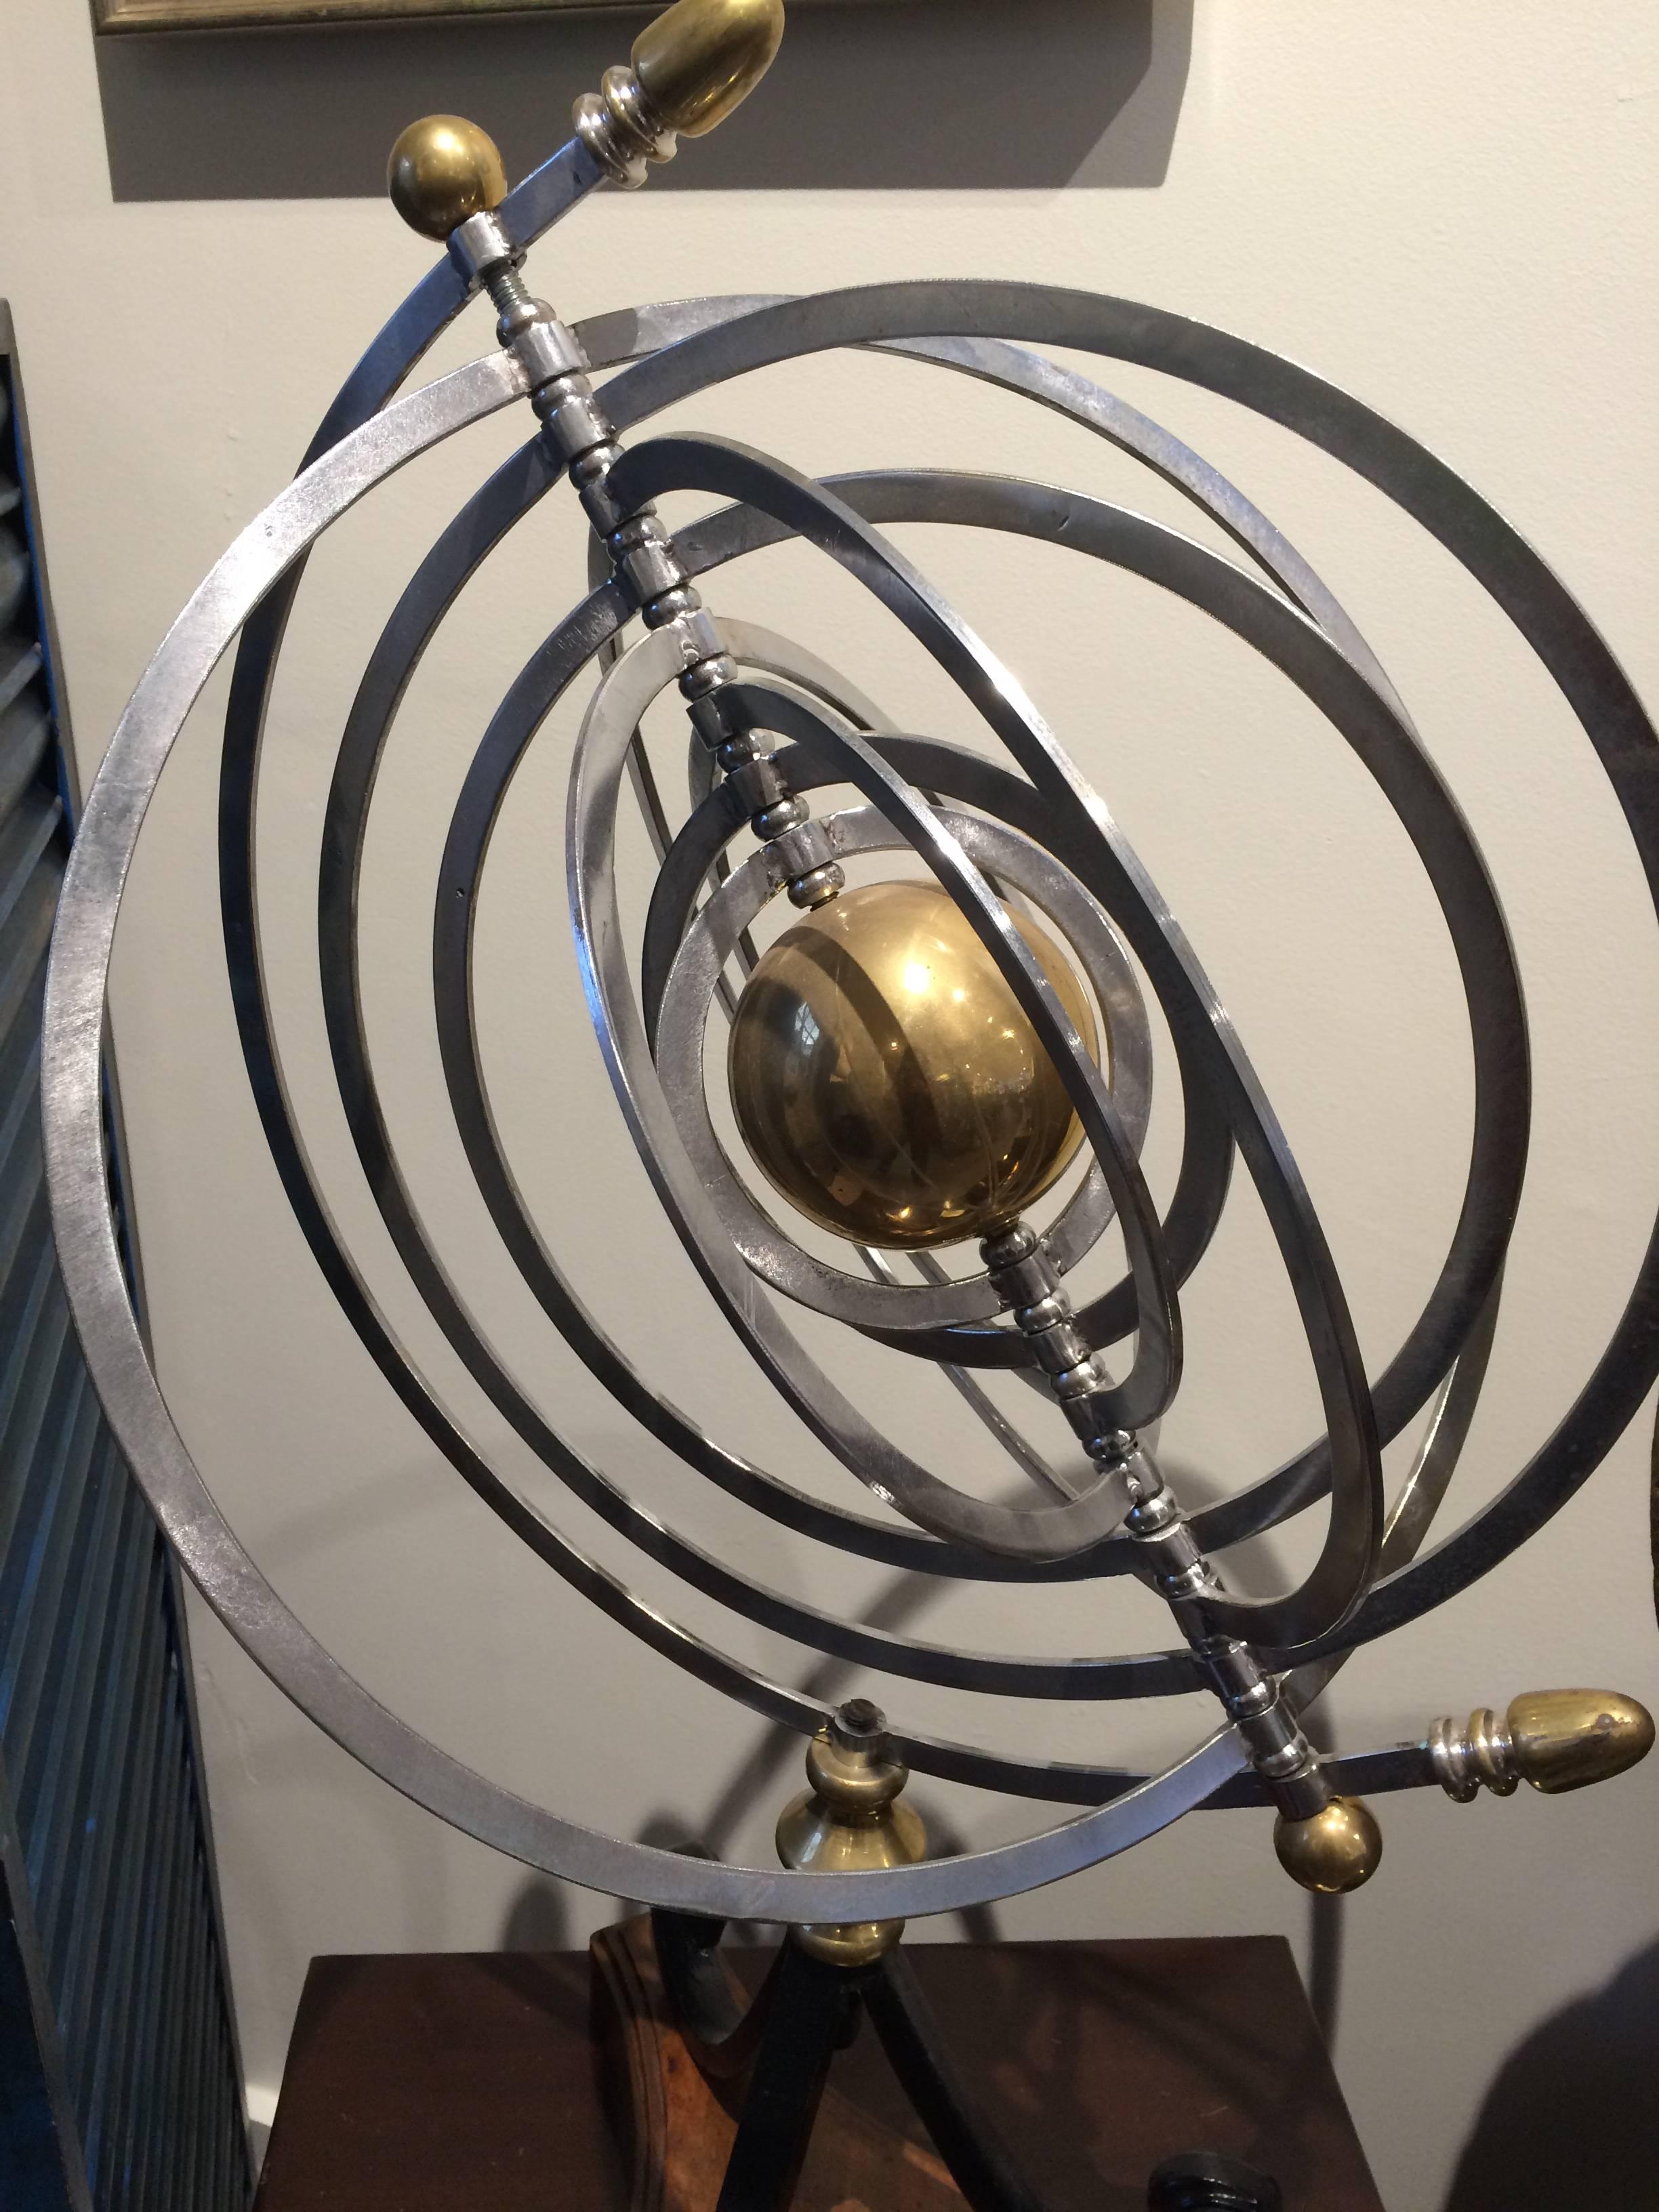 Celestial chrome armillary with a brass centre representing the sun and chrome orbital rings of the nine planets that move creating a dimensional affect or lay flat. Mounted on a black iron stand and teak wood base, circa 1970s-1980s.